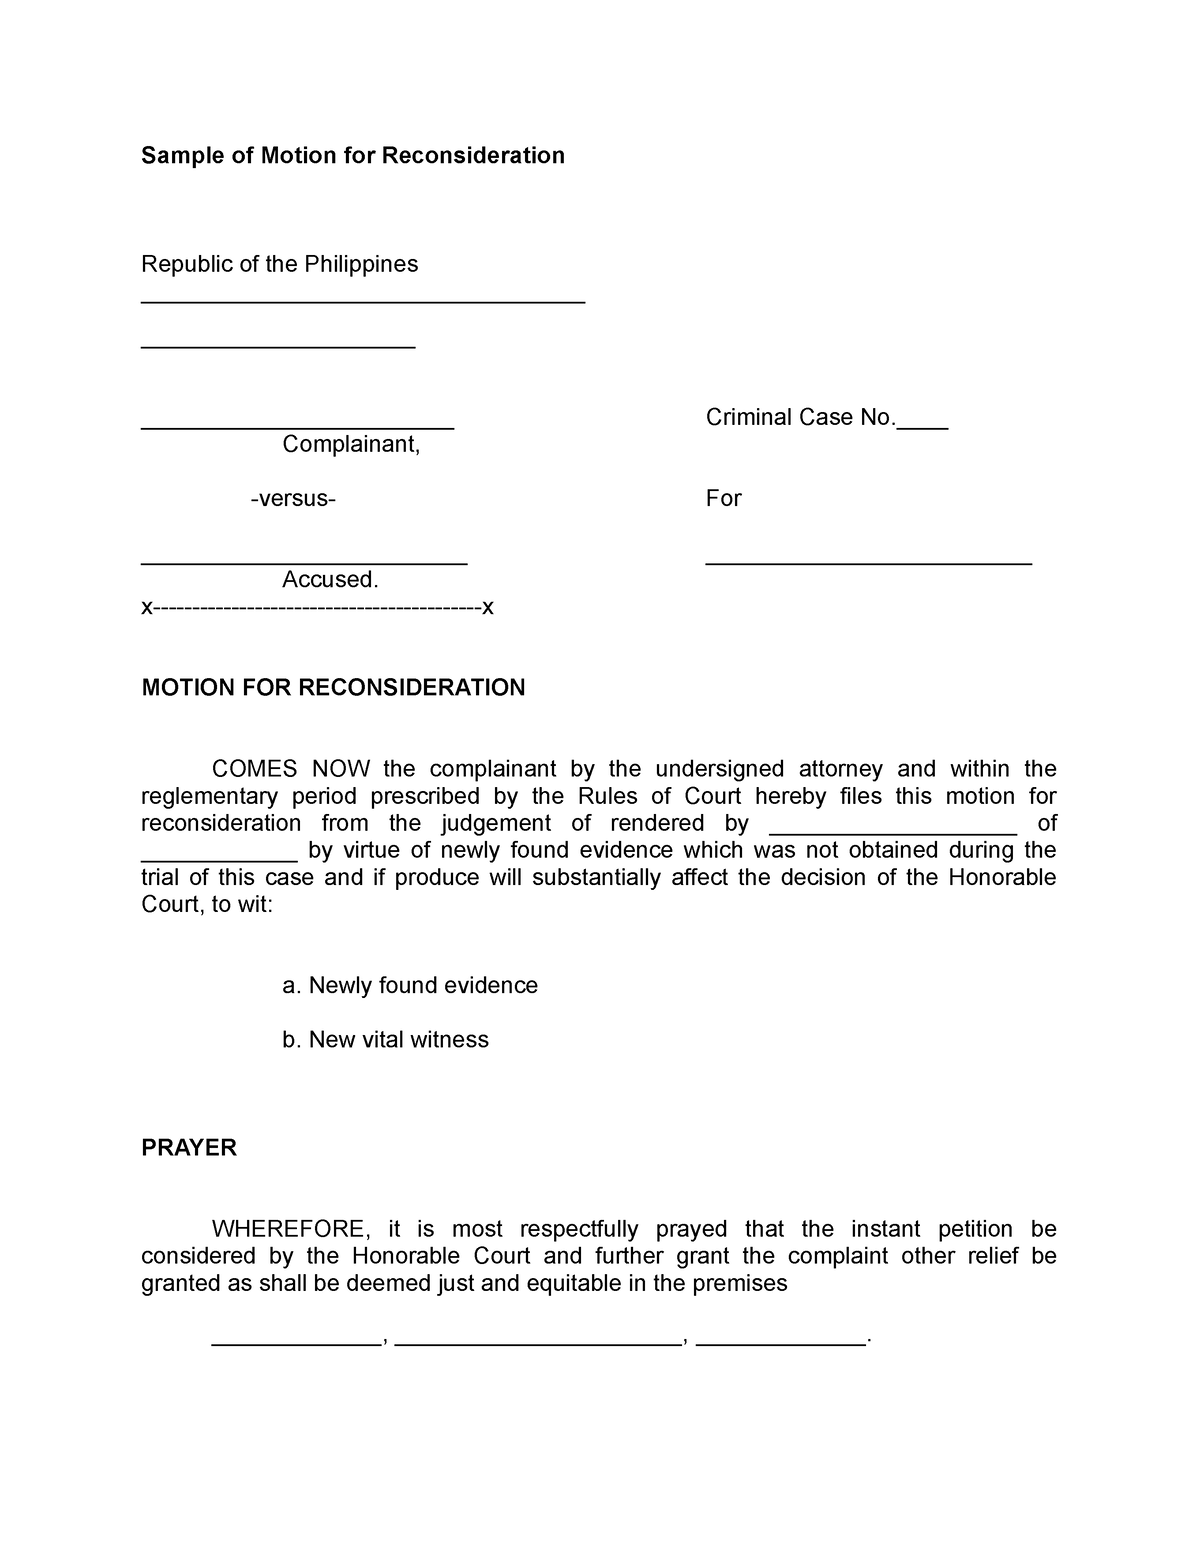 Motion For Reconsideration Sample Form Philippines